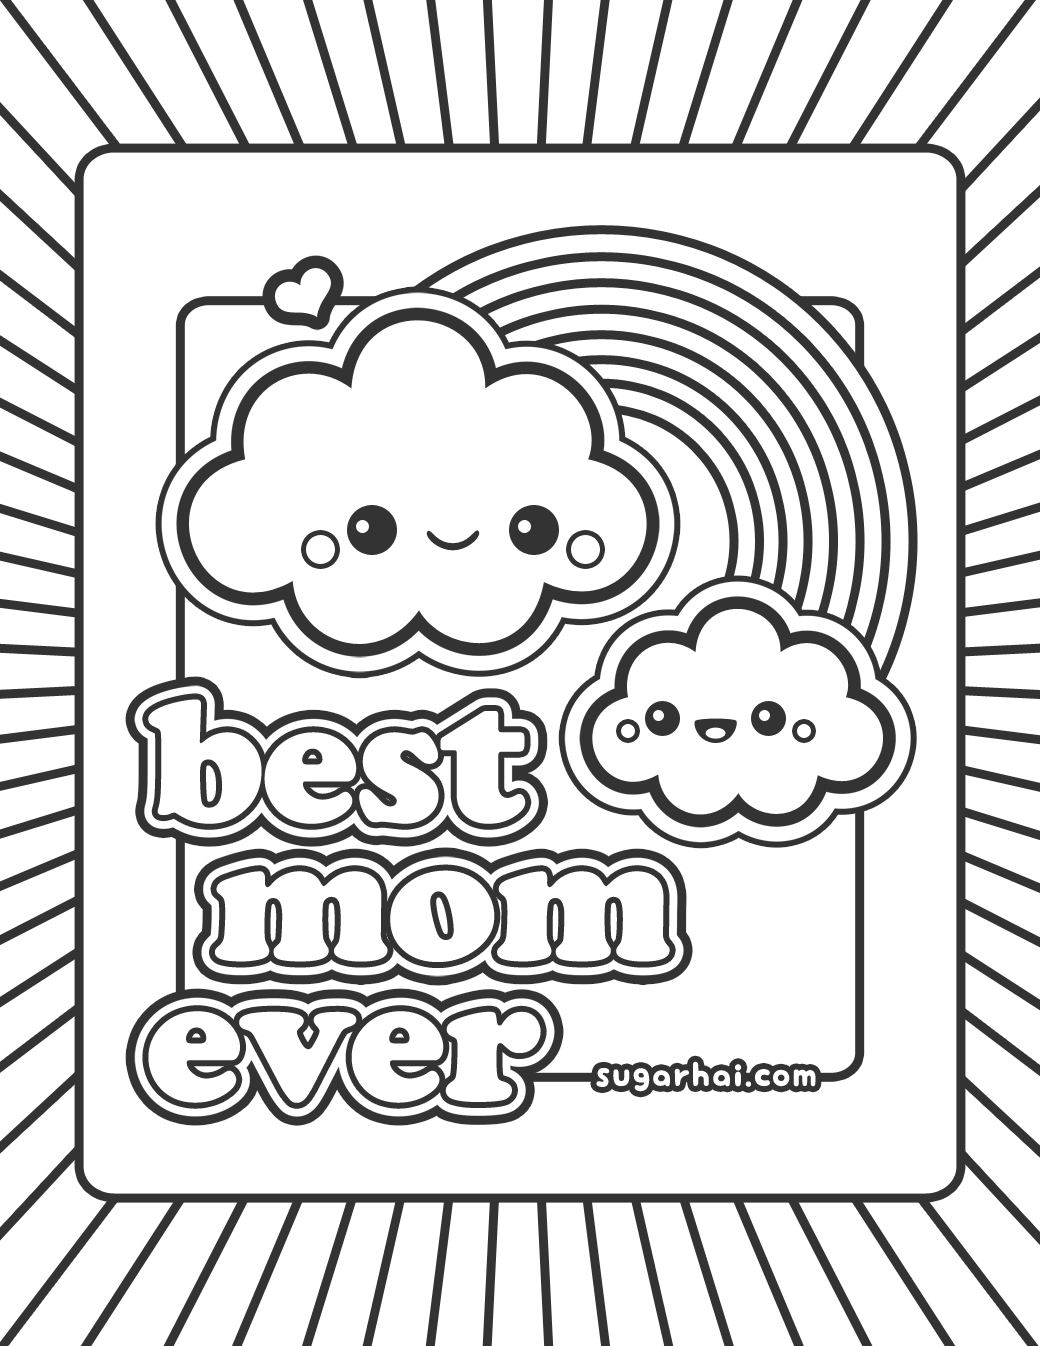 Mom And Dad Coloring Pages - Coloring Home